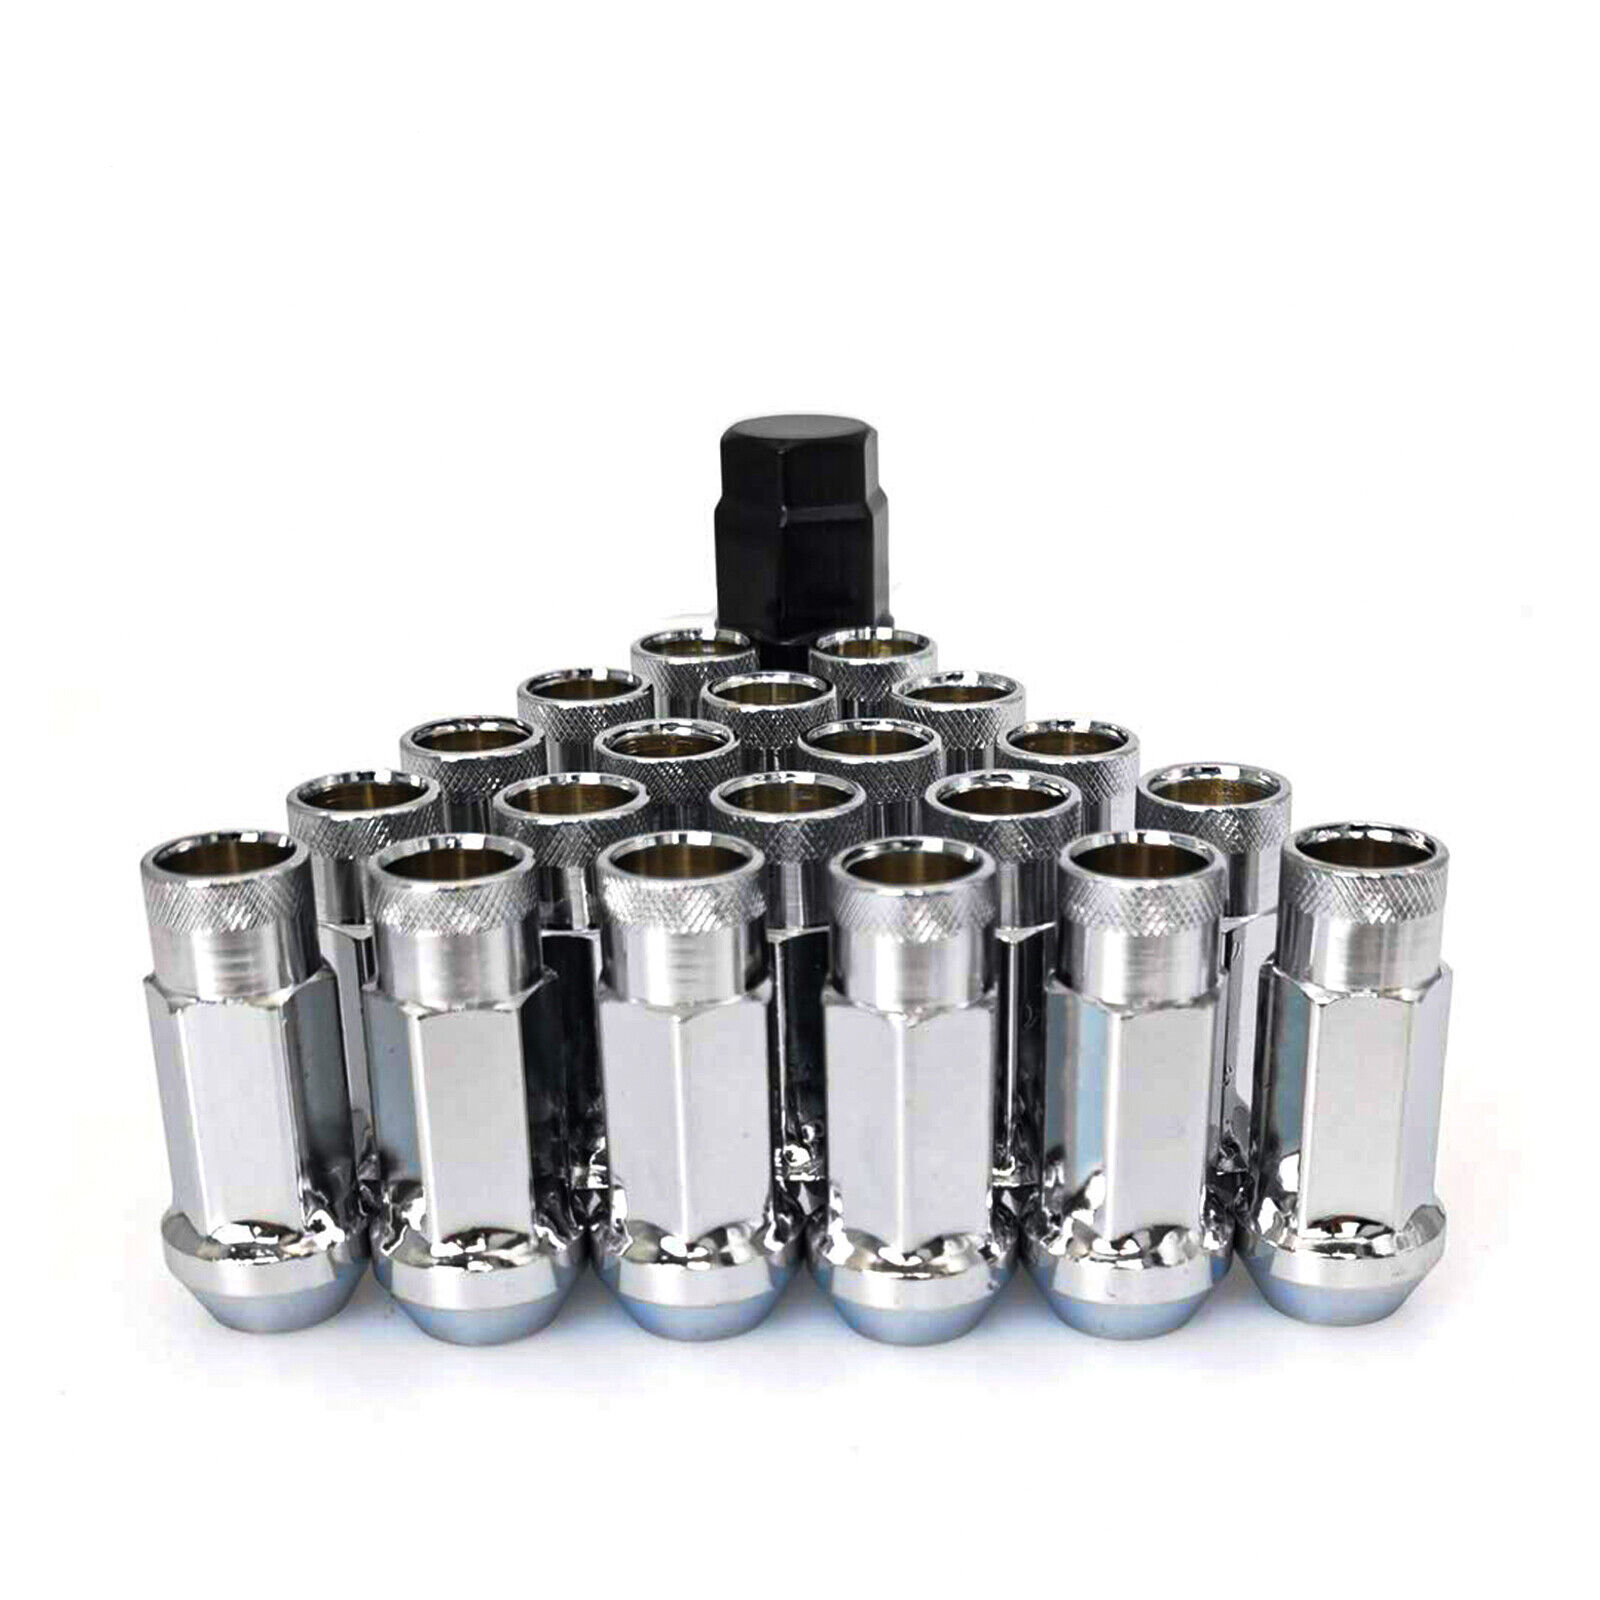 Silver Extended Open End Steel Wheel Tuner Lug Nuts M12x1.5  Adapter 20pcs